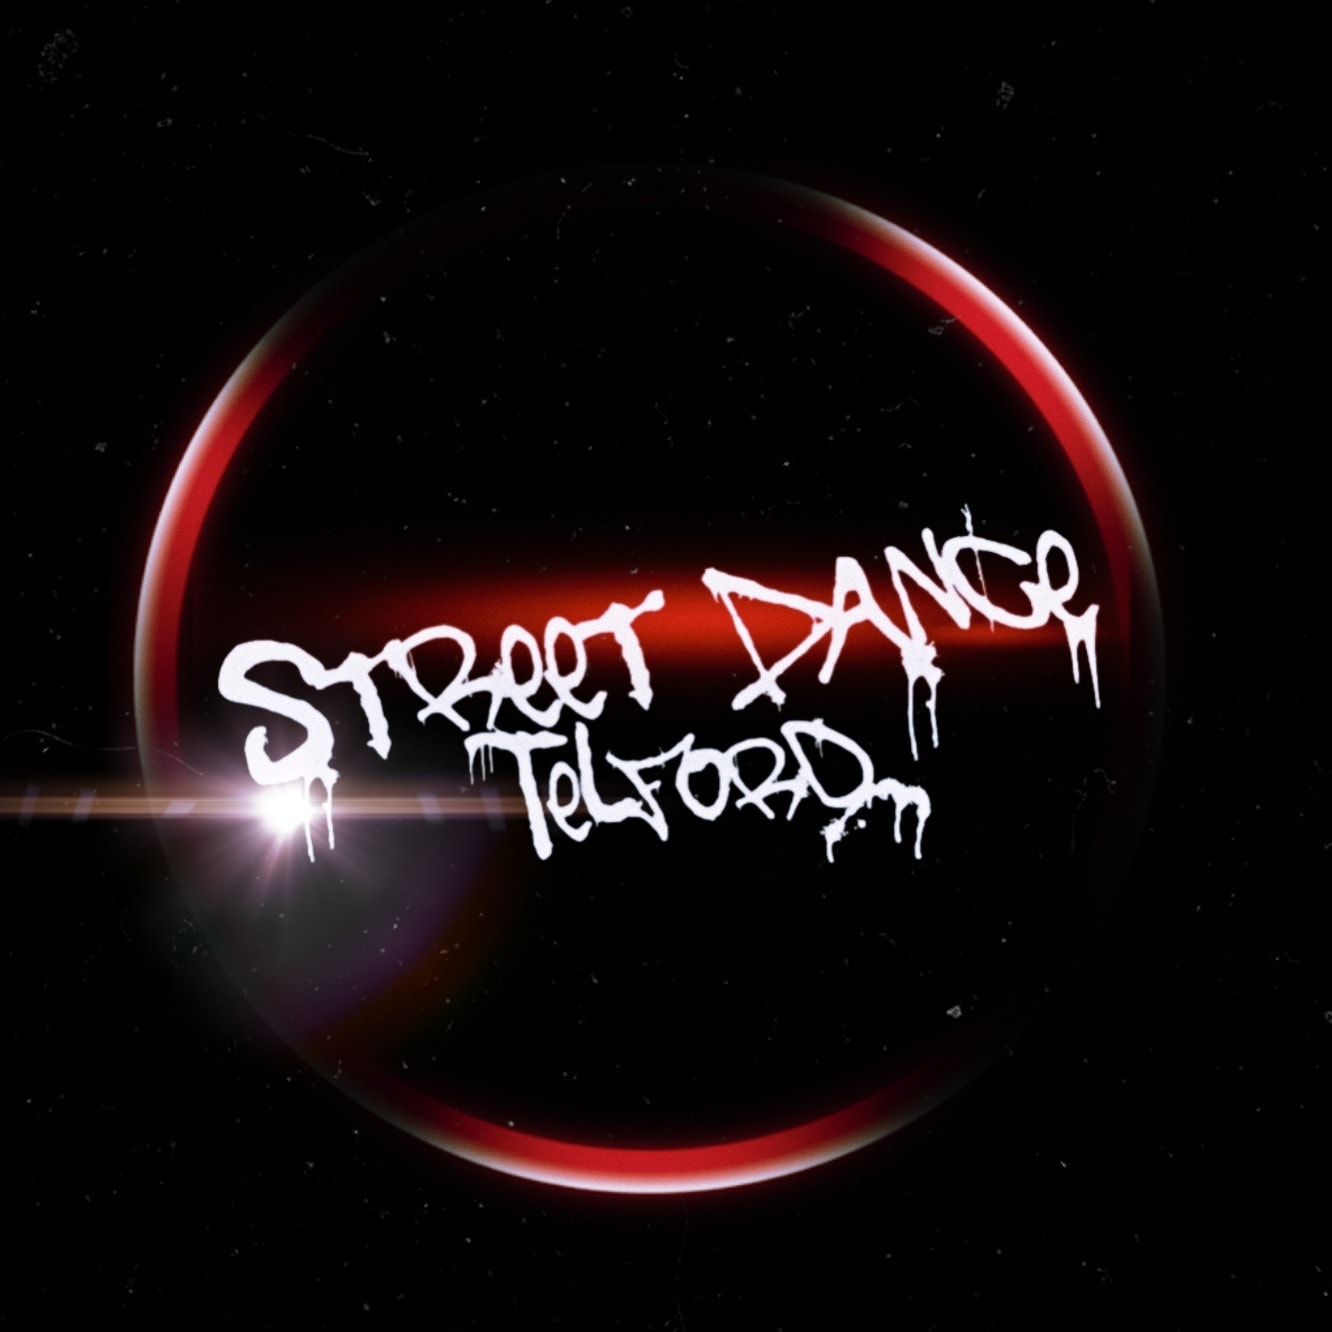 Take part in drama and performing arts Image for Street Dance Telford